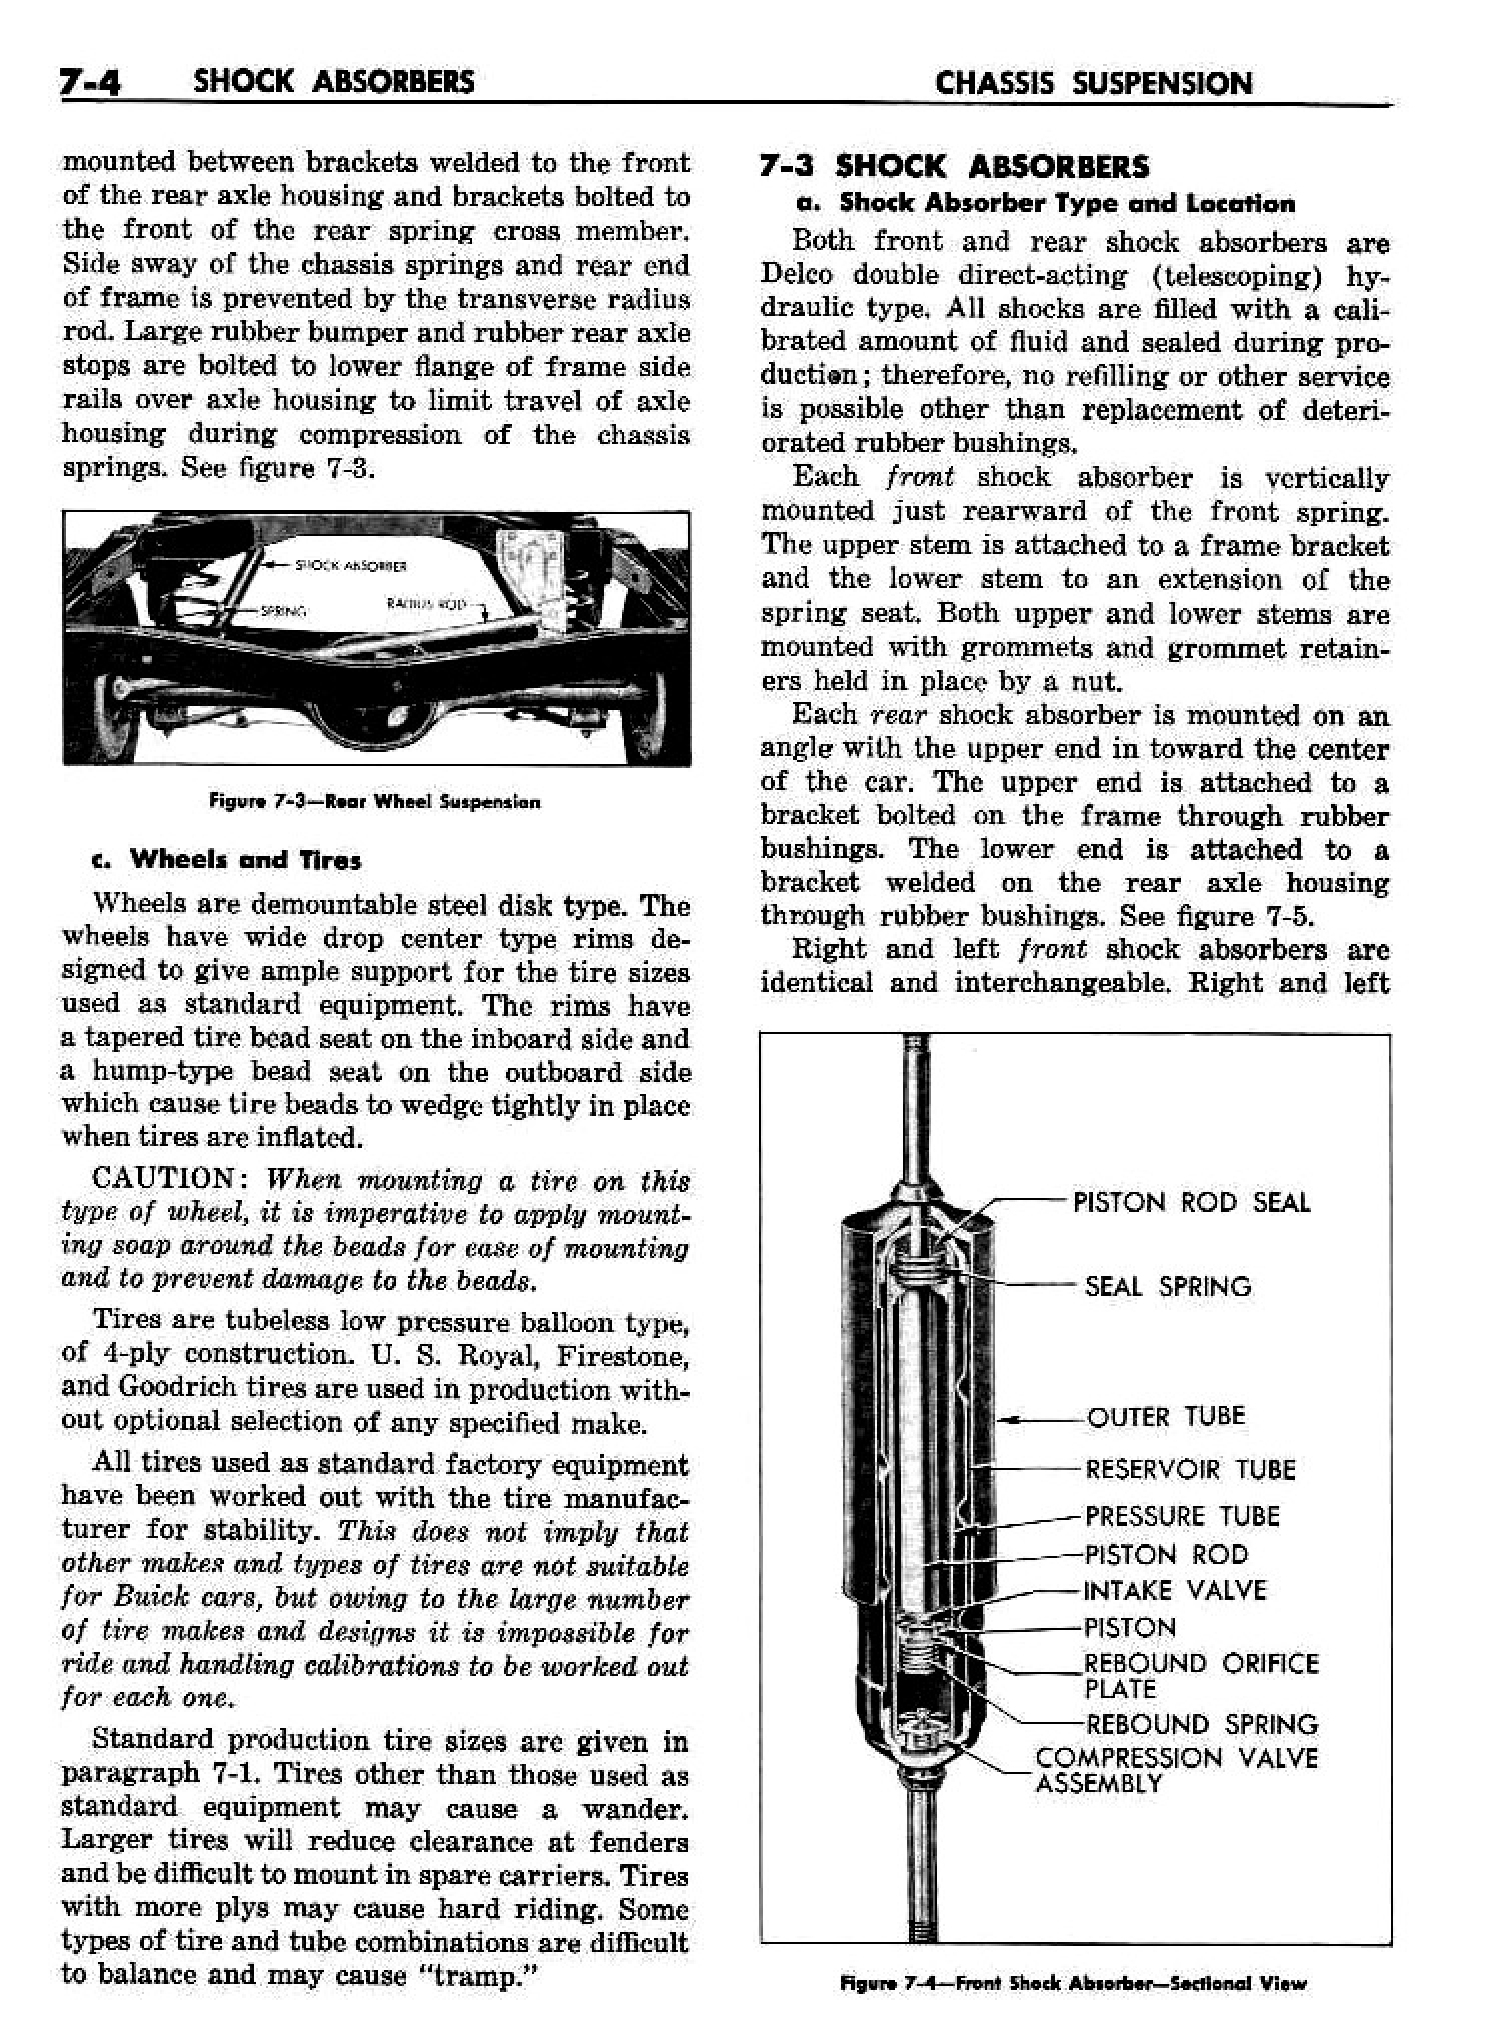 n_08 1958 Buick Shop Manual - Chassis Suspension_4.jpg